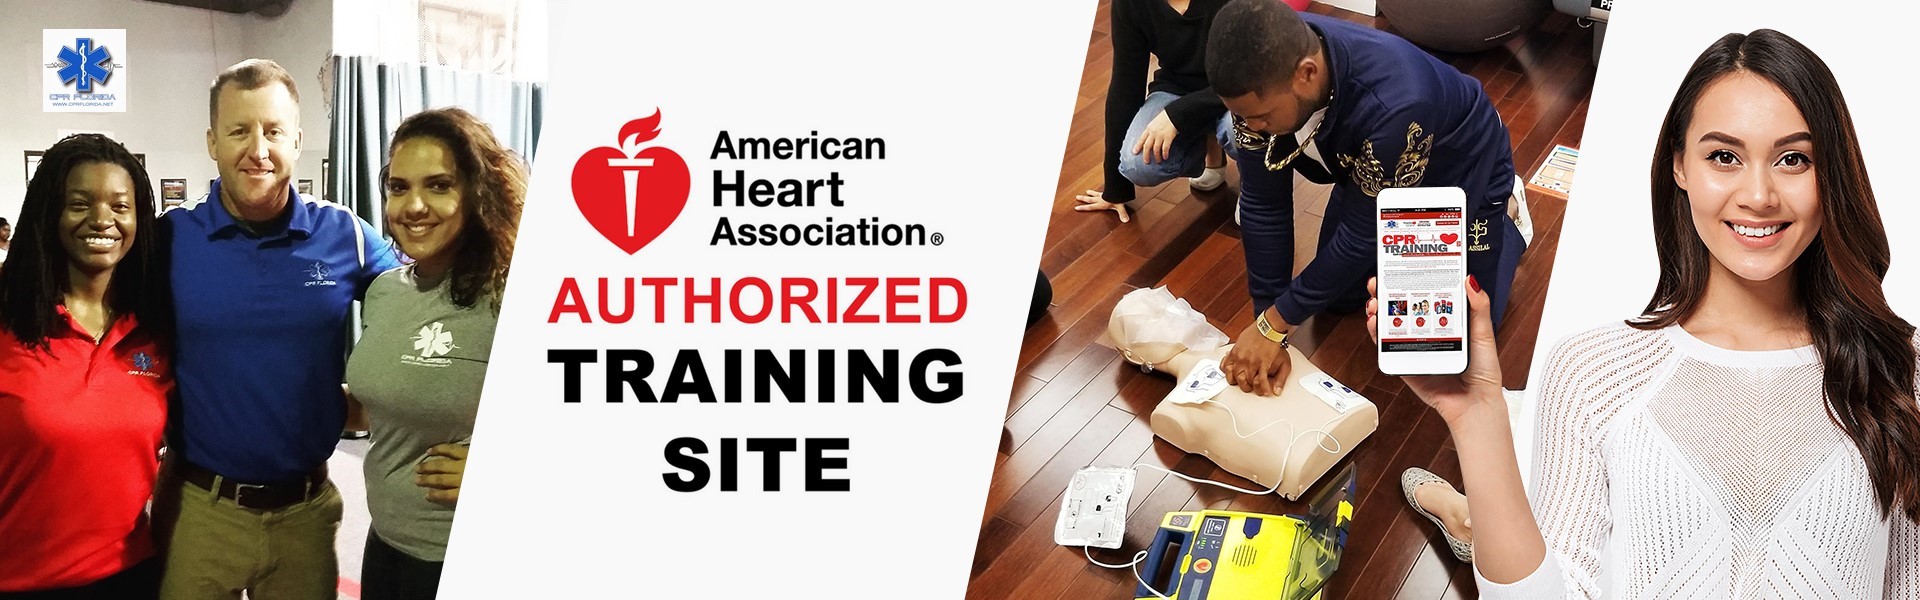 cpr aed first aid certification combo class